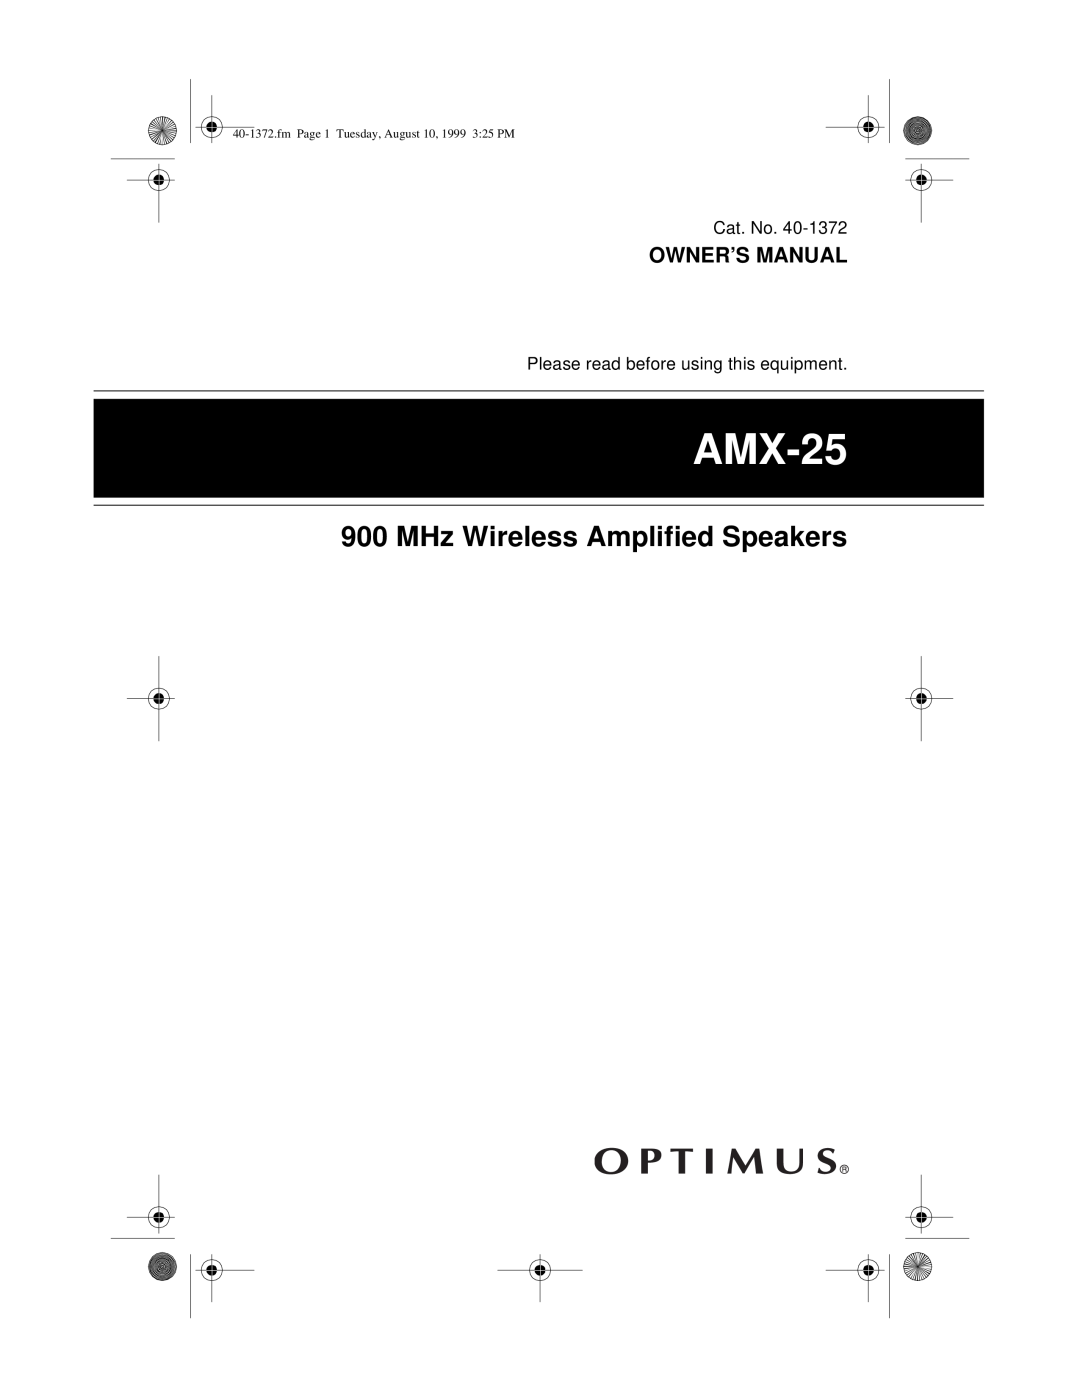 Panasonic AMX-25 owner manual MHz Wireless Amplified Speakers, fmPage 1 Tuesday, August 10, 1999 3 25 PM 